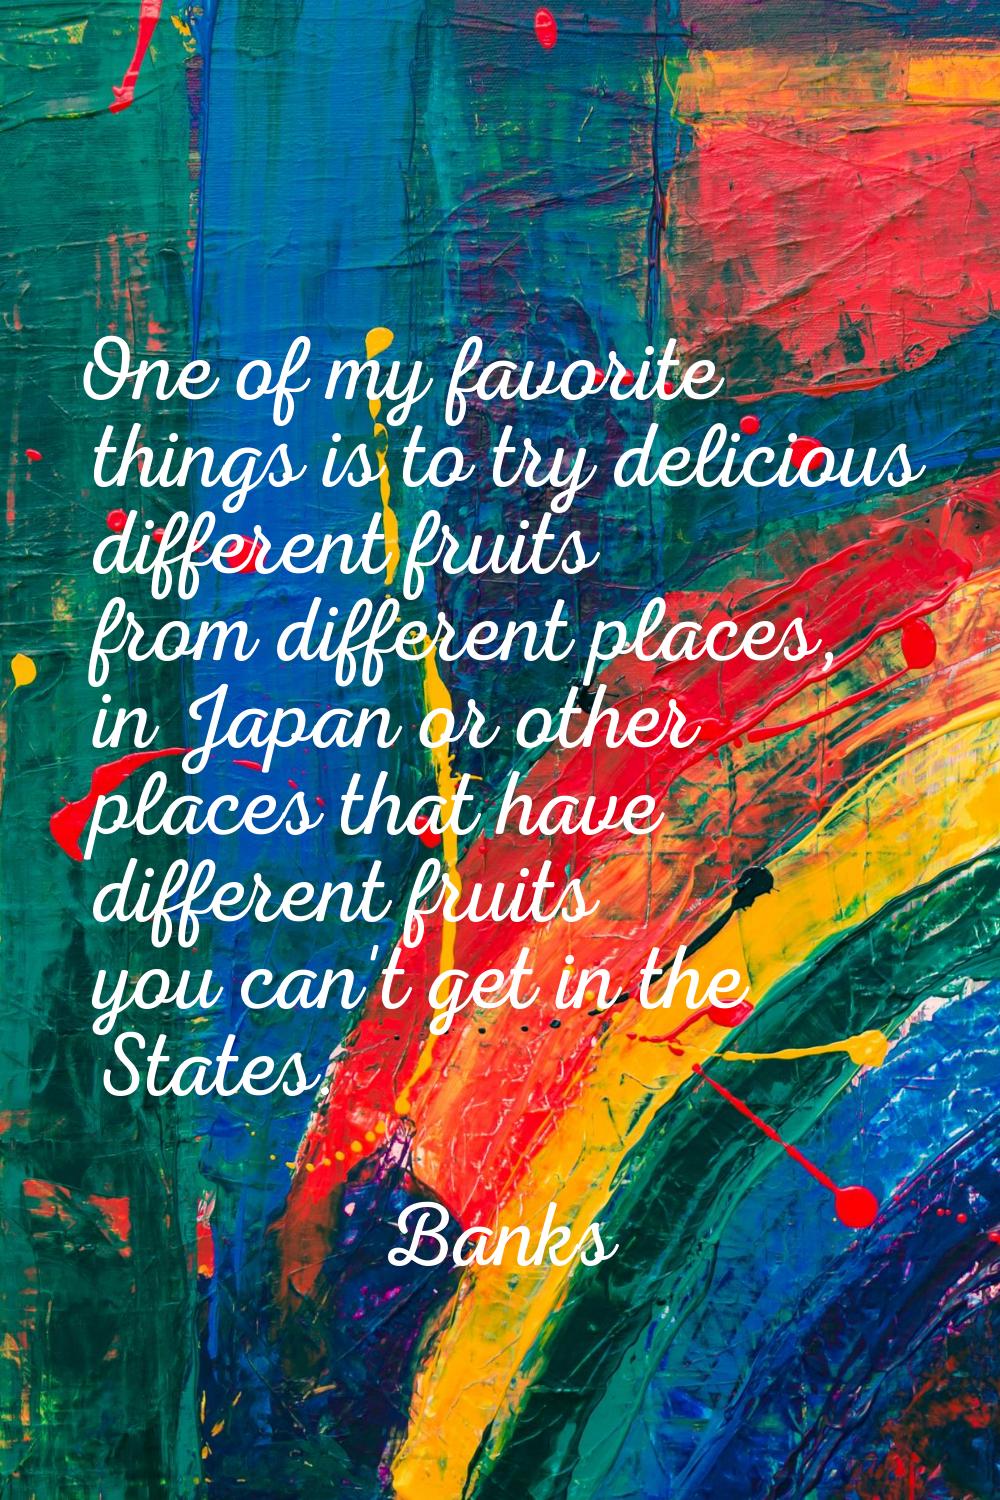 One of my favorite things is to try delicious different fruits from different places, in Japan or o